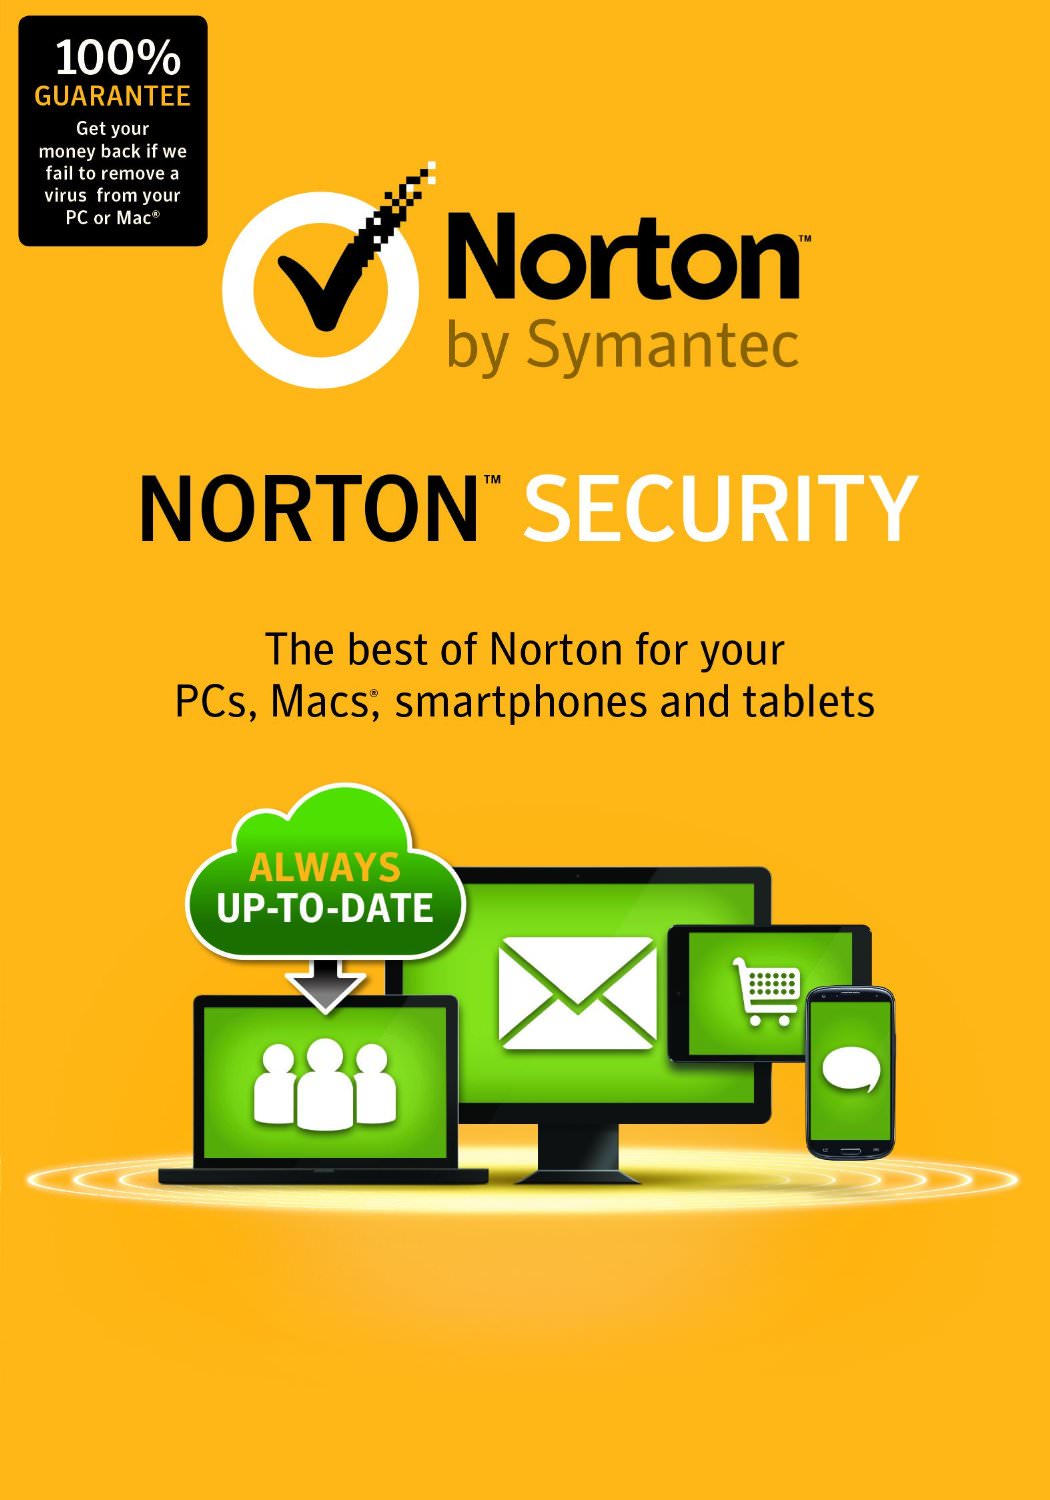 Norton security software download sonic mania 6.0 download apk for android